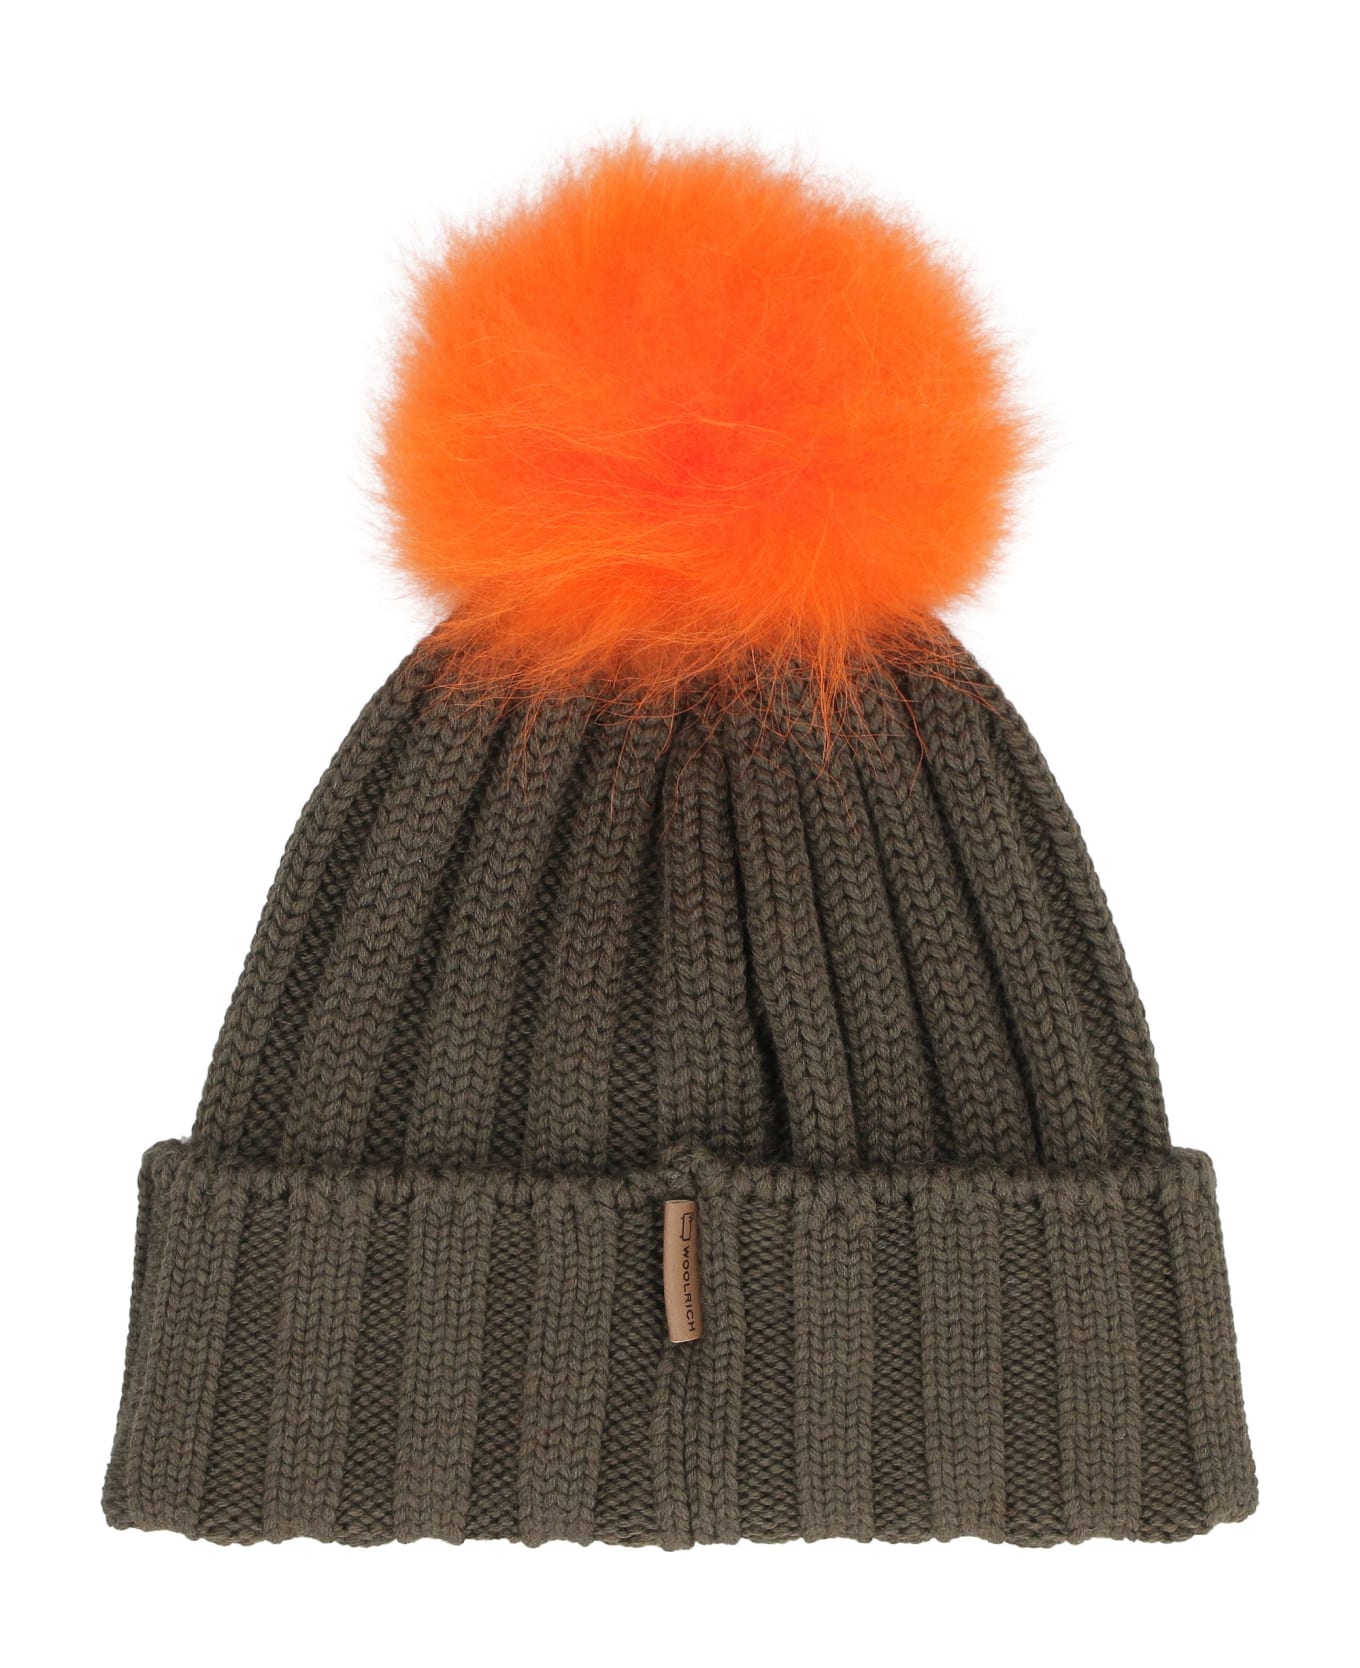 Woolrich Knitted Wool Hat With Pom-pom - green